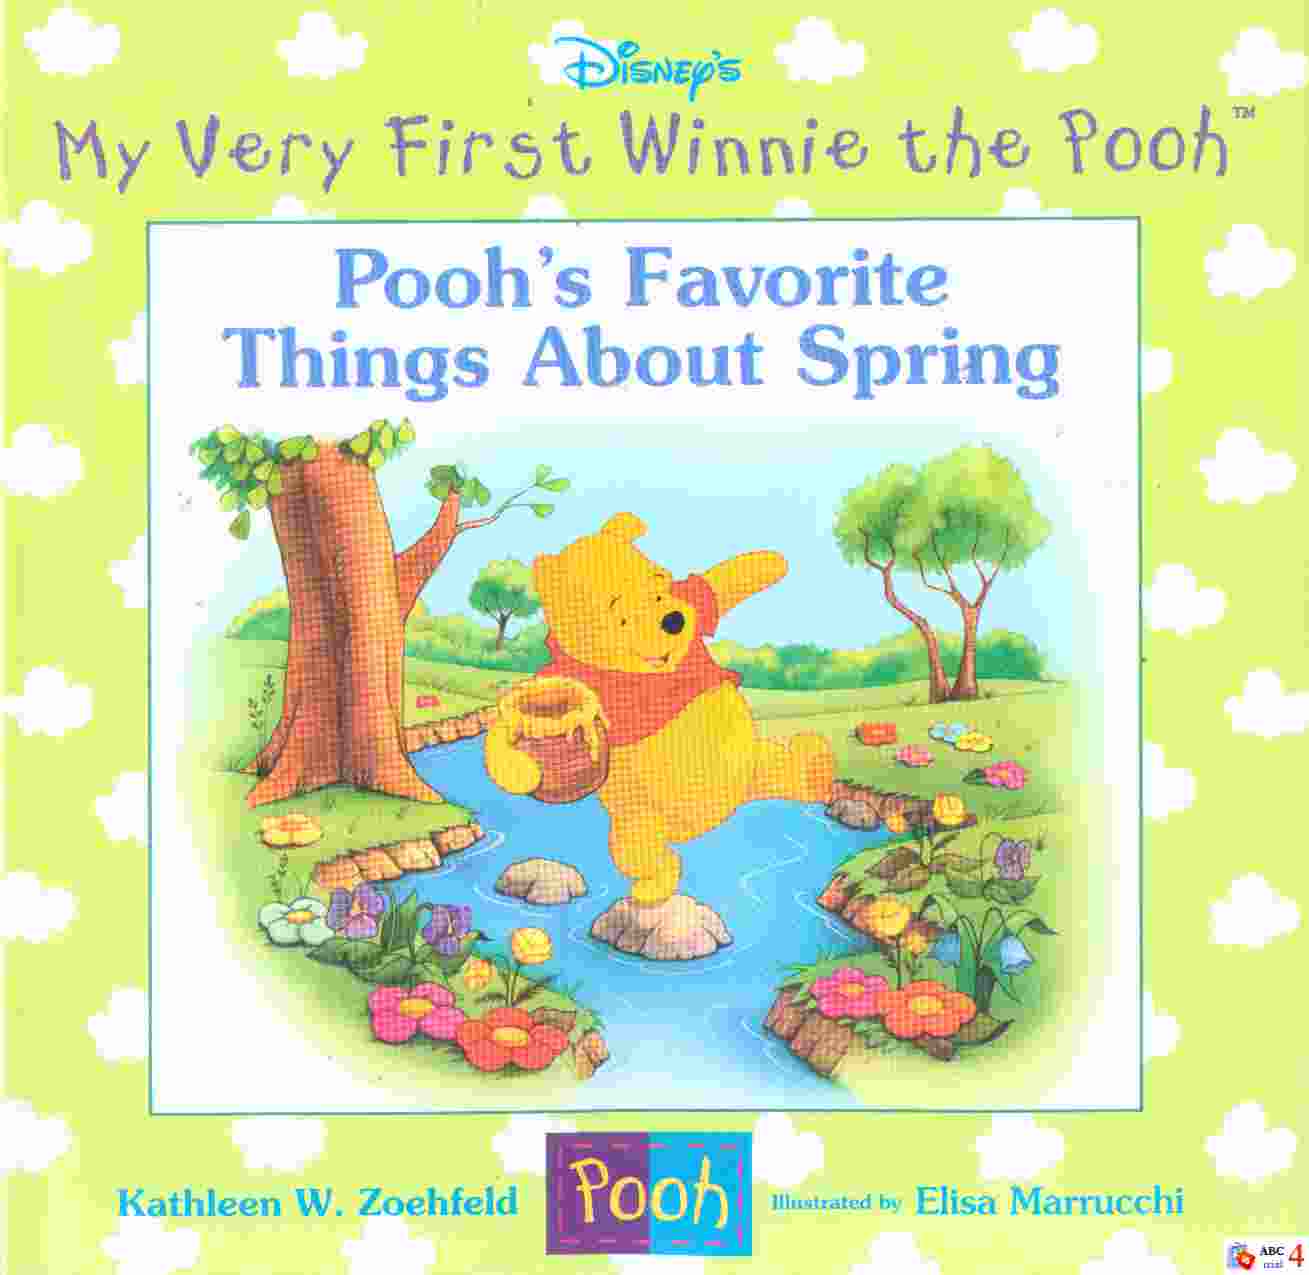 Pooh's favorite things about spring 封面